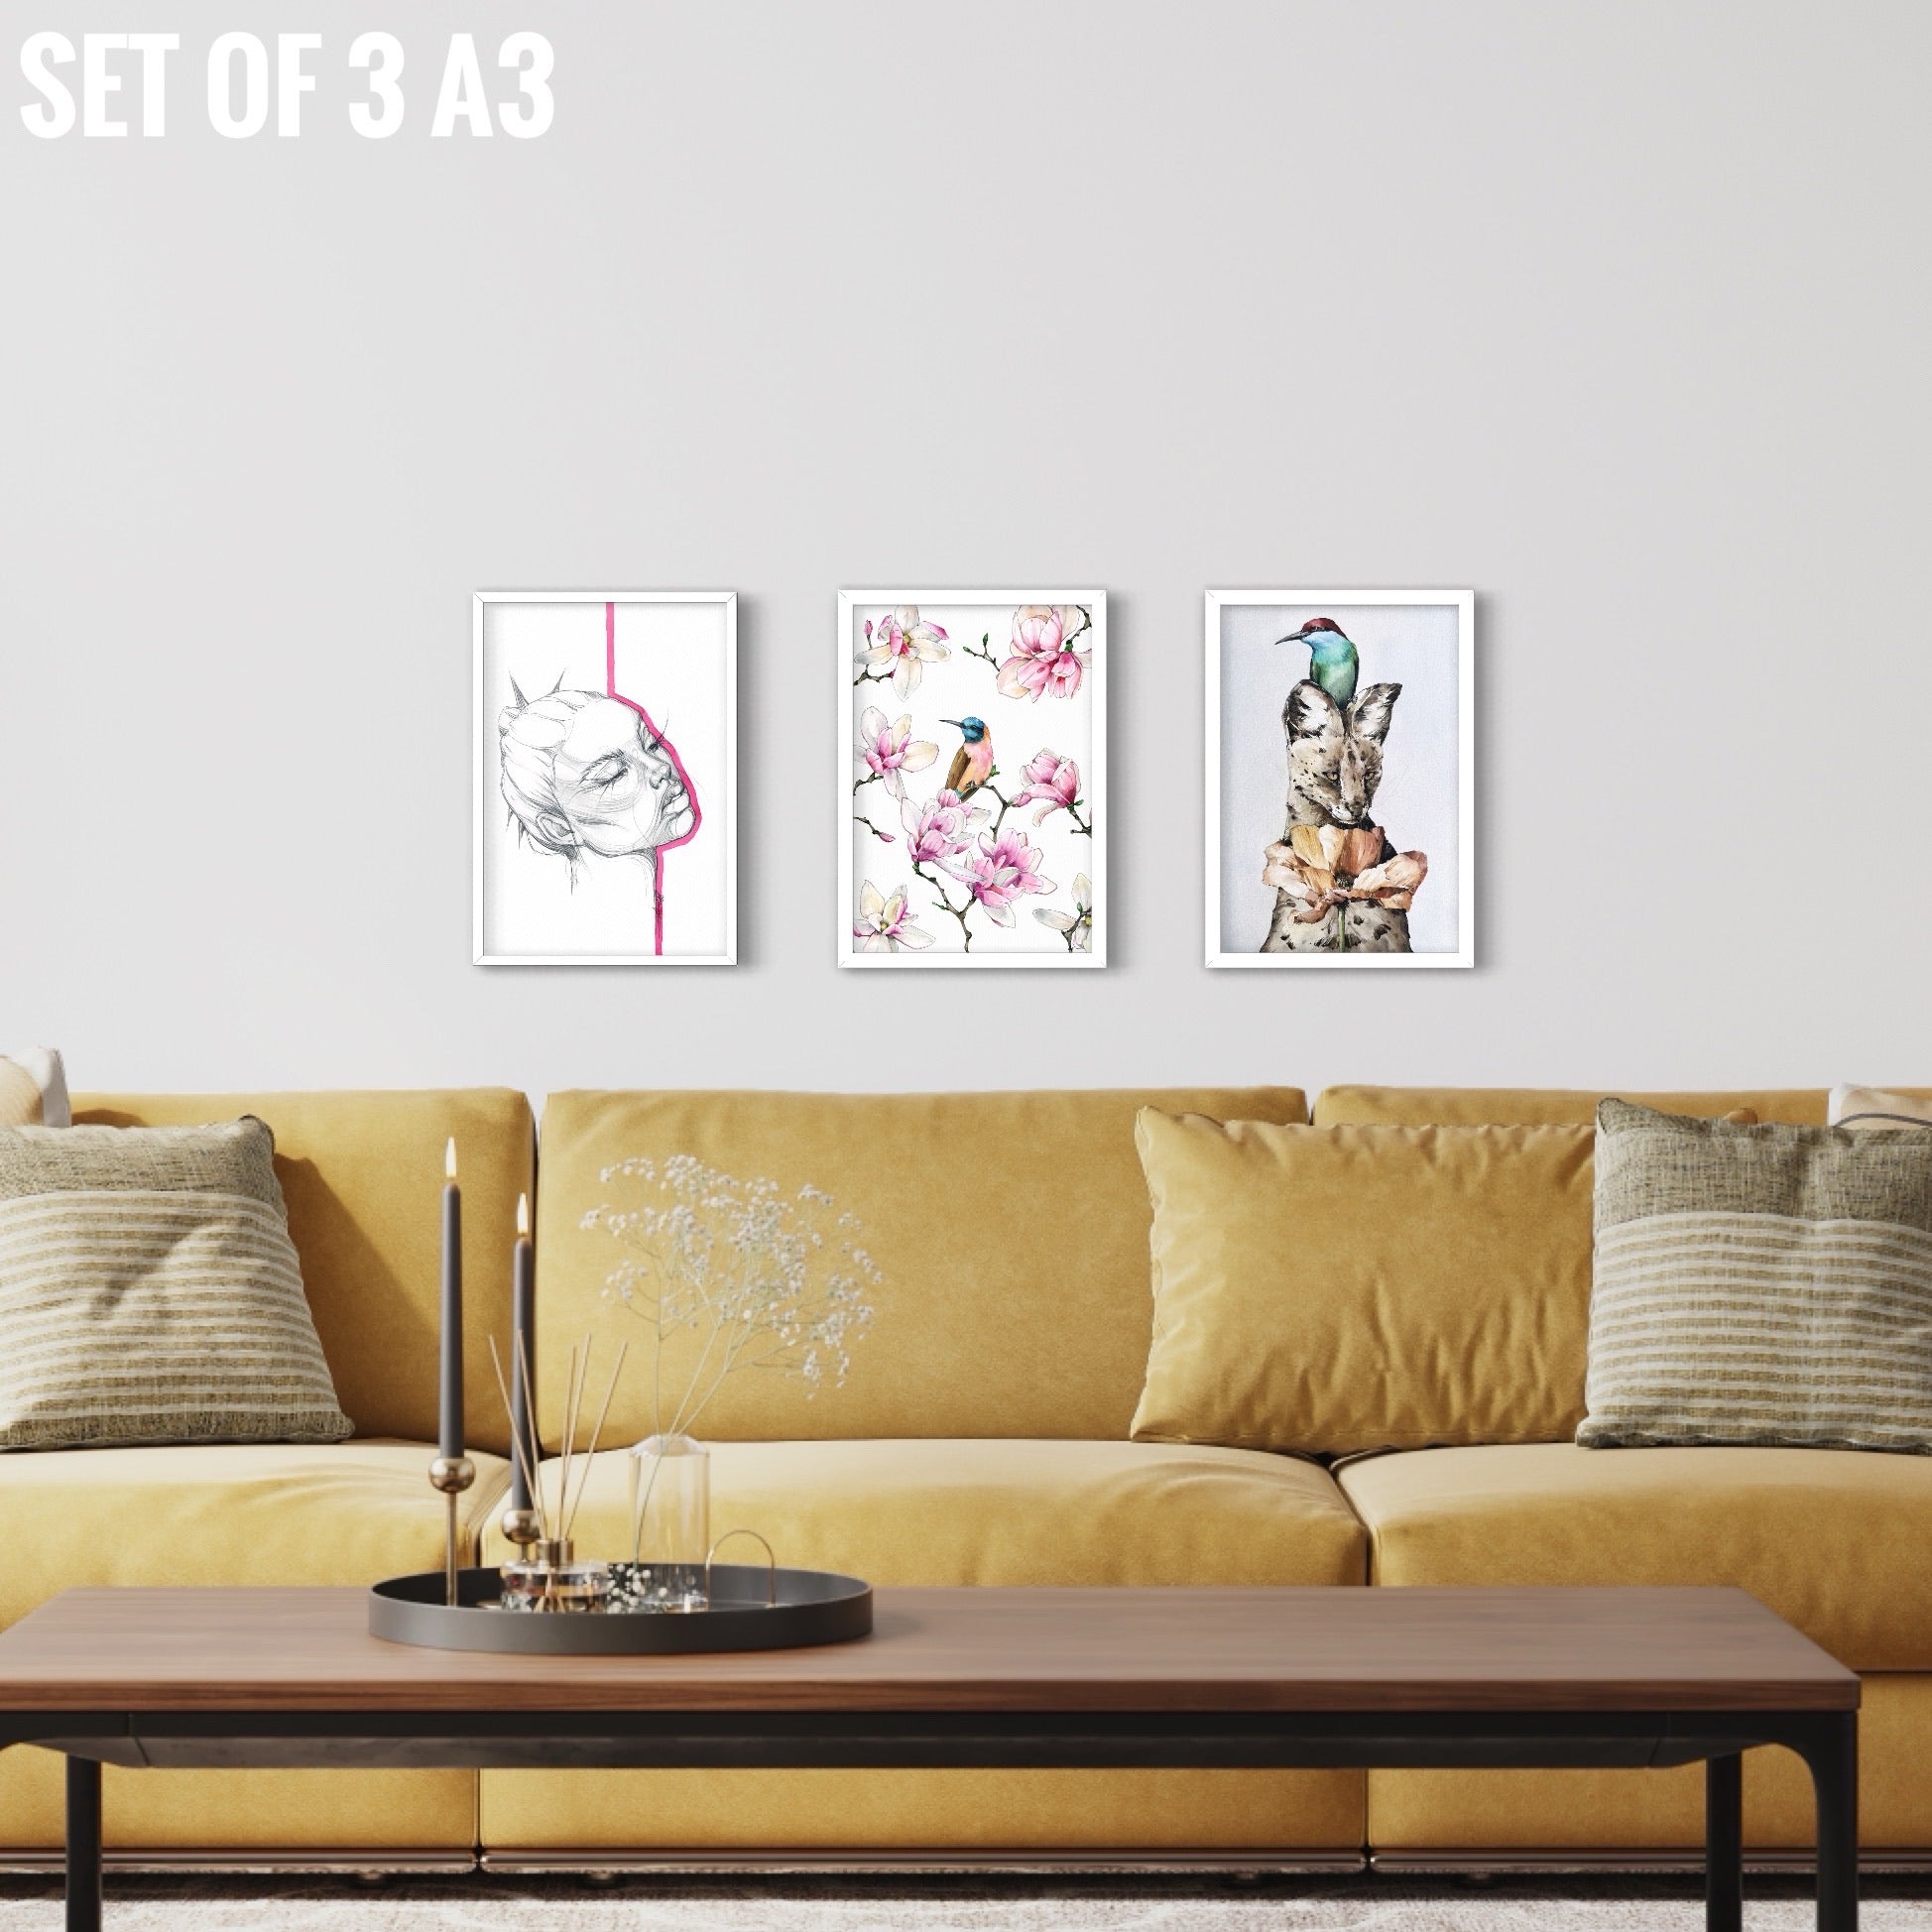 Set of 3 prints by Polina Bright